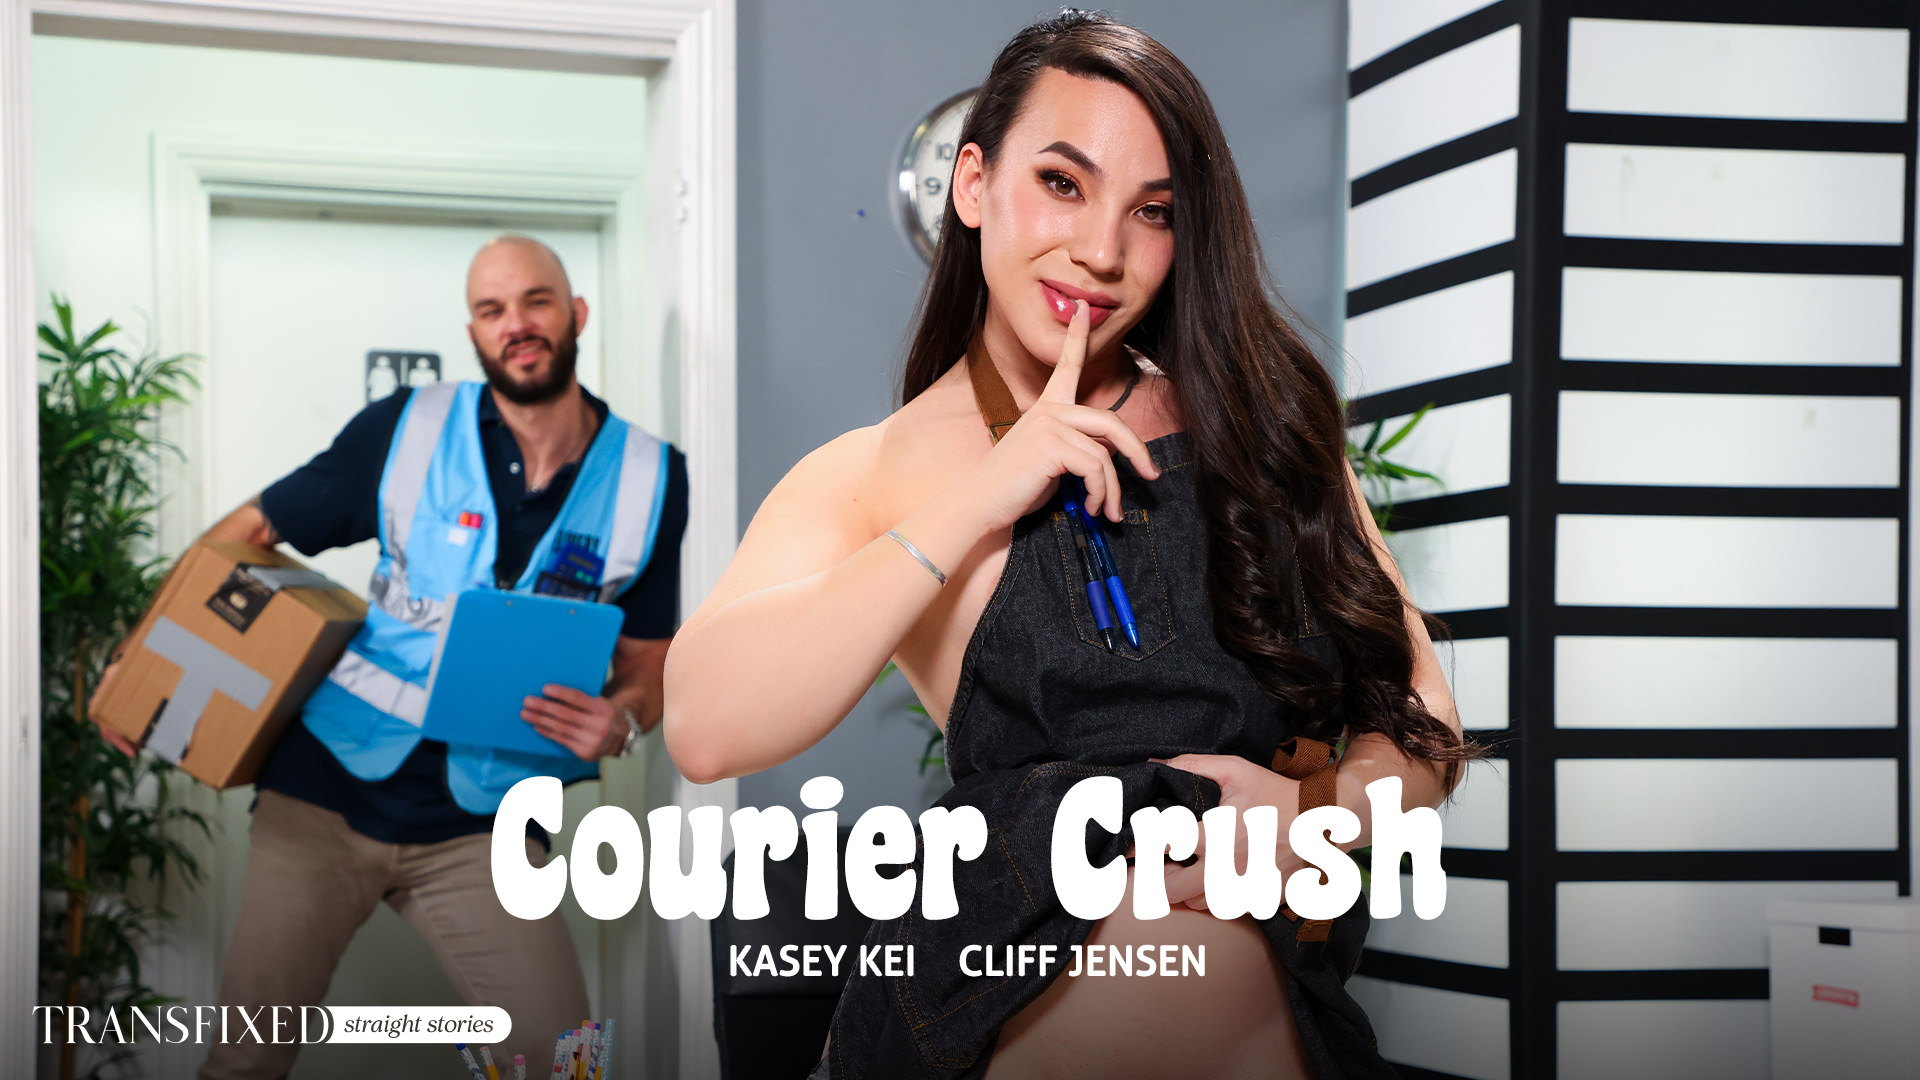 Courier Crush, Scene #01 in Transfixed series with Kasey Kei, Cliff Jensen by Adult Time